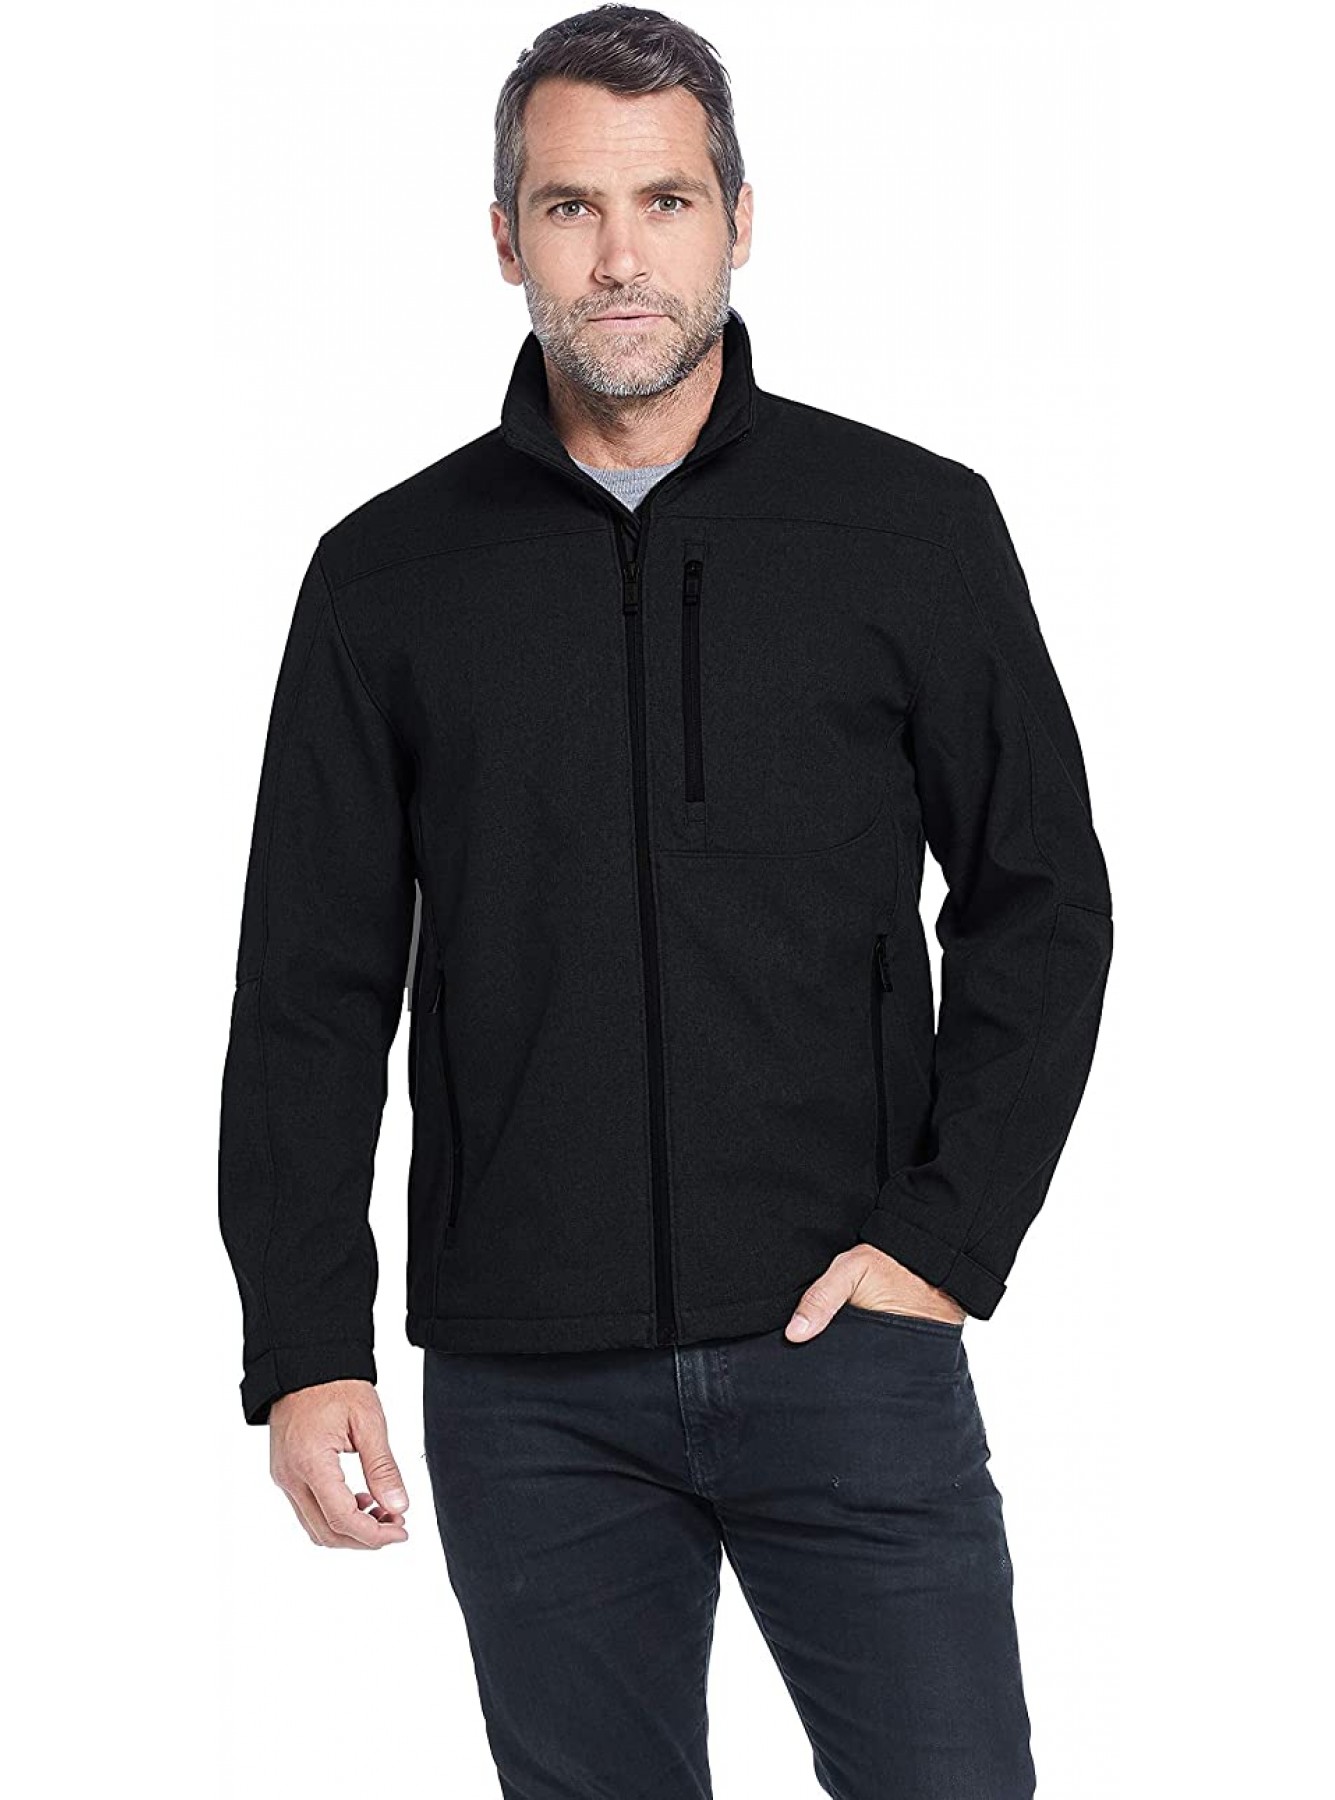 Weatherproof Men's Midweight Water and Wind Resistant Soft Shell Jacket